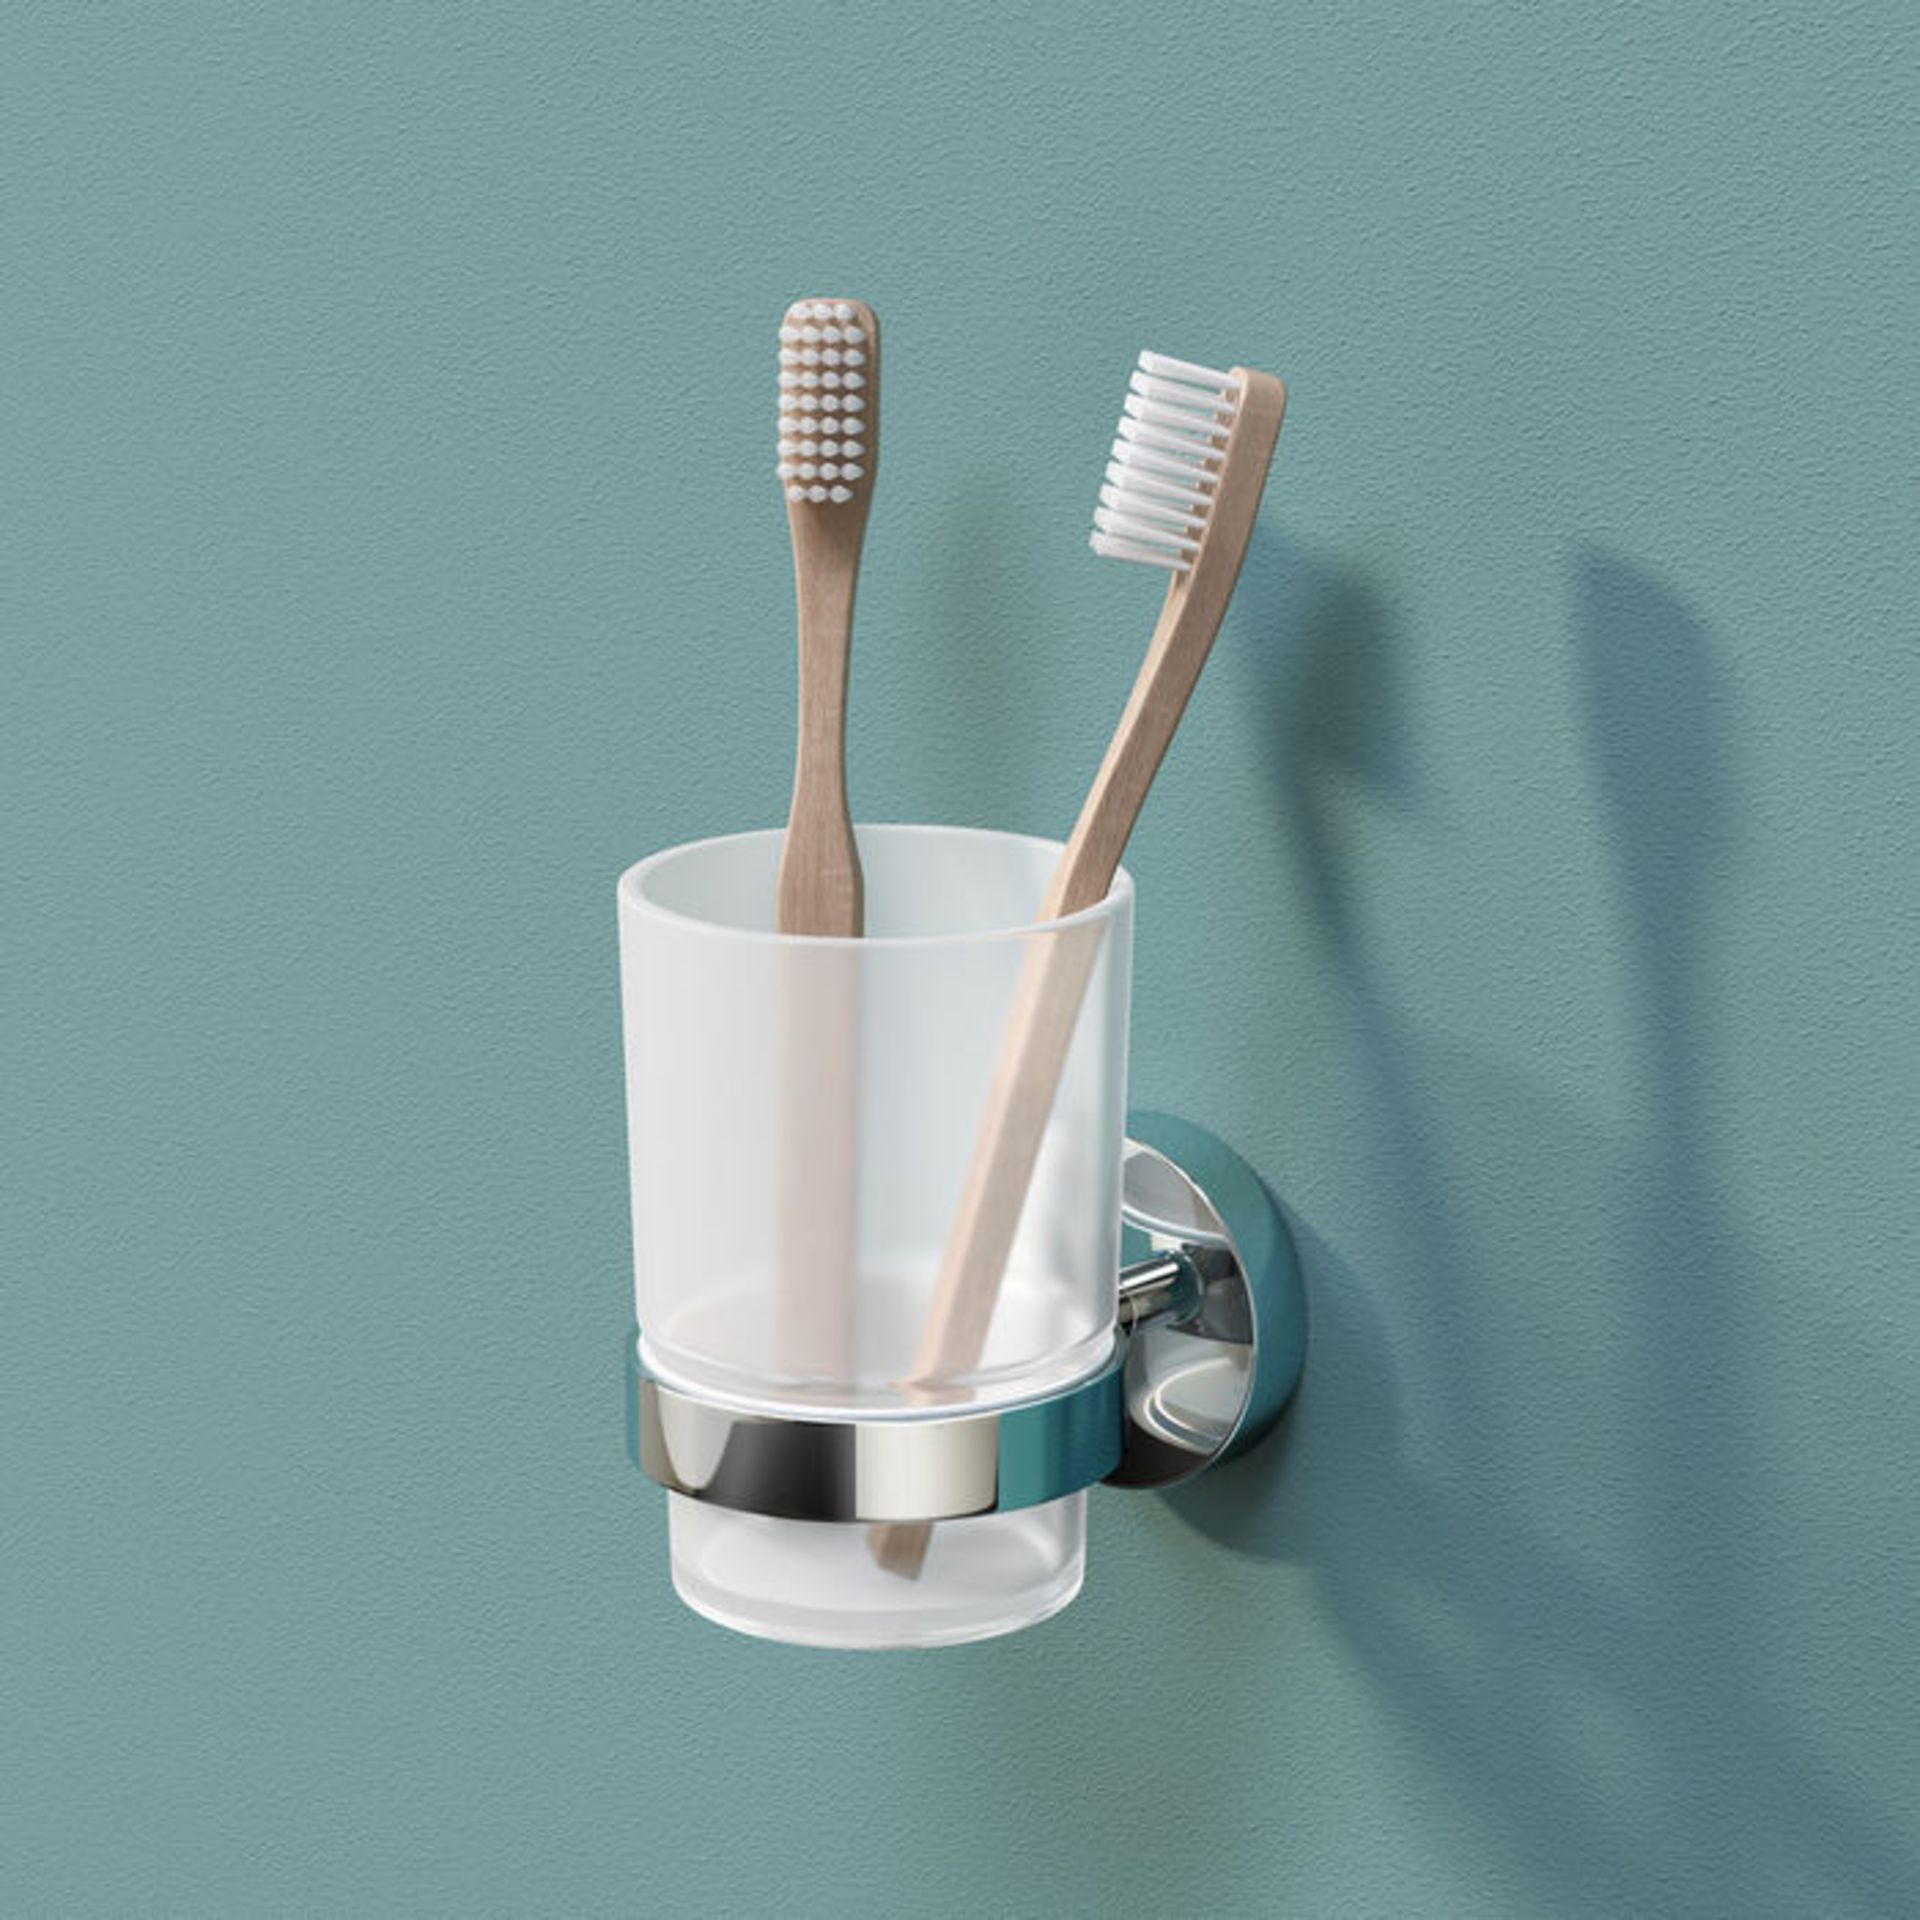 (NK111) Finsbury Tumbler Holder. Completes your bathroom with a little extra functionality and style